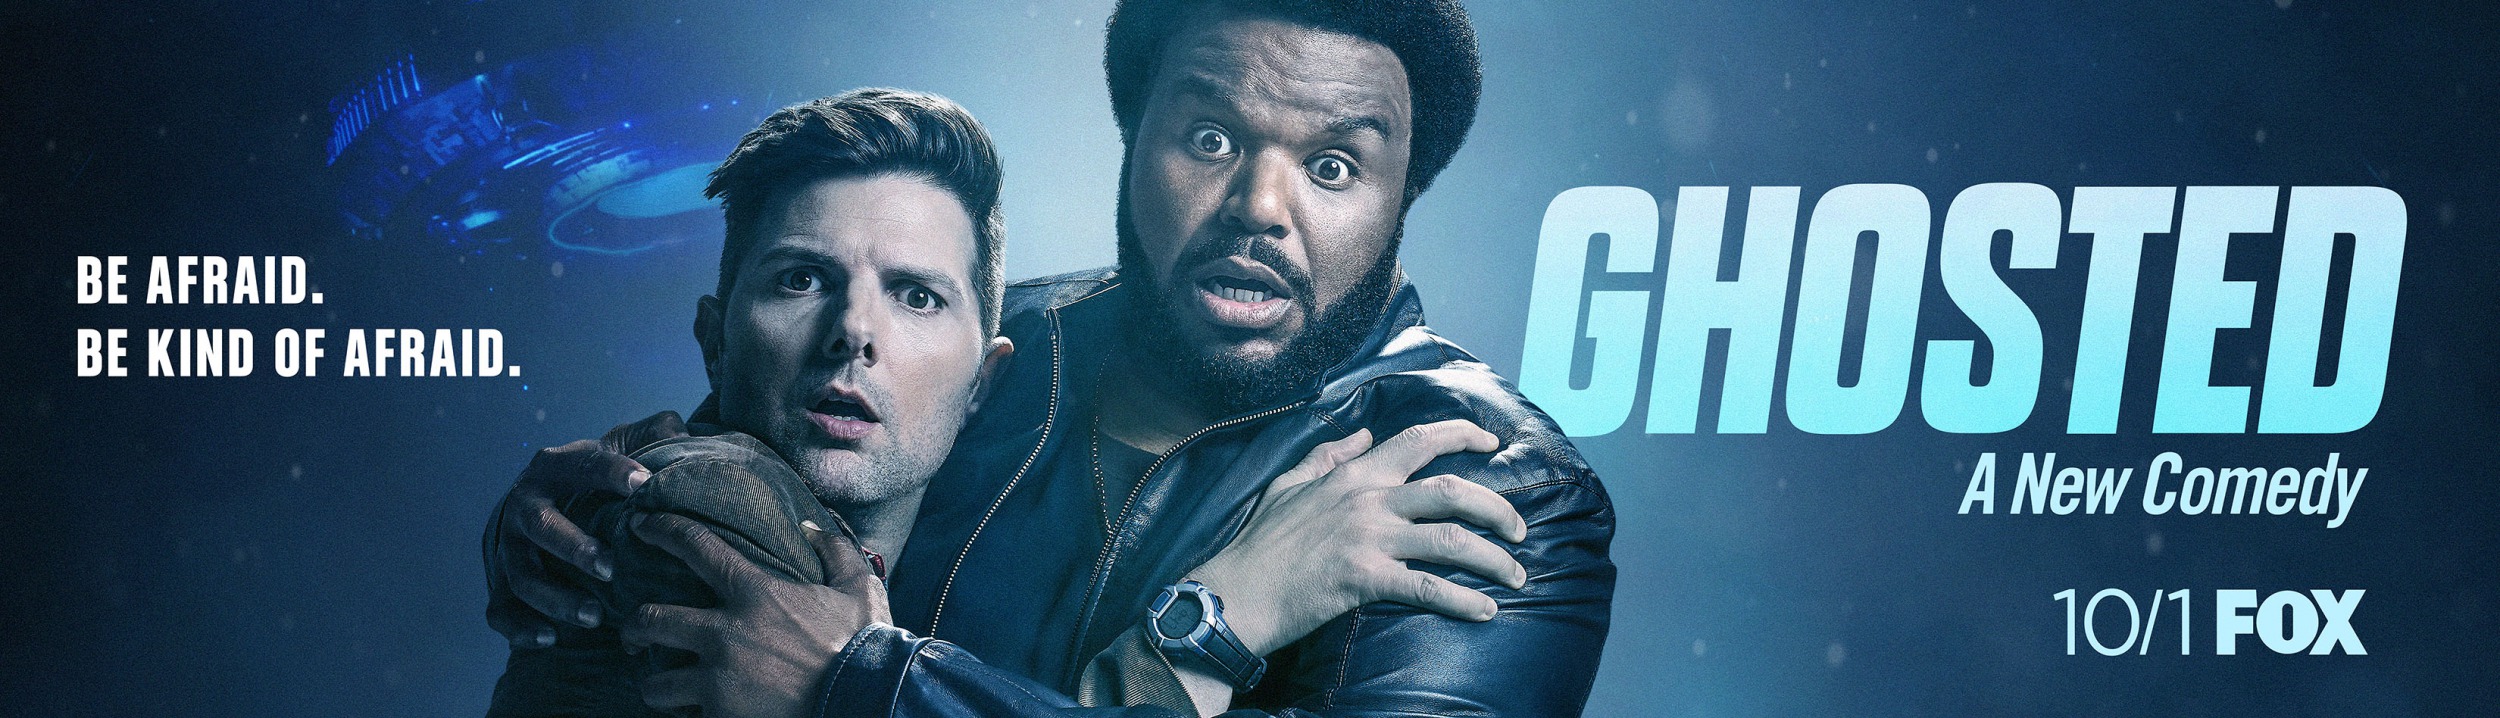 Mega Sized TV Poster Image for Ghosted (#4 of 4)